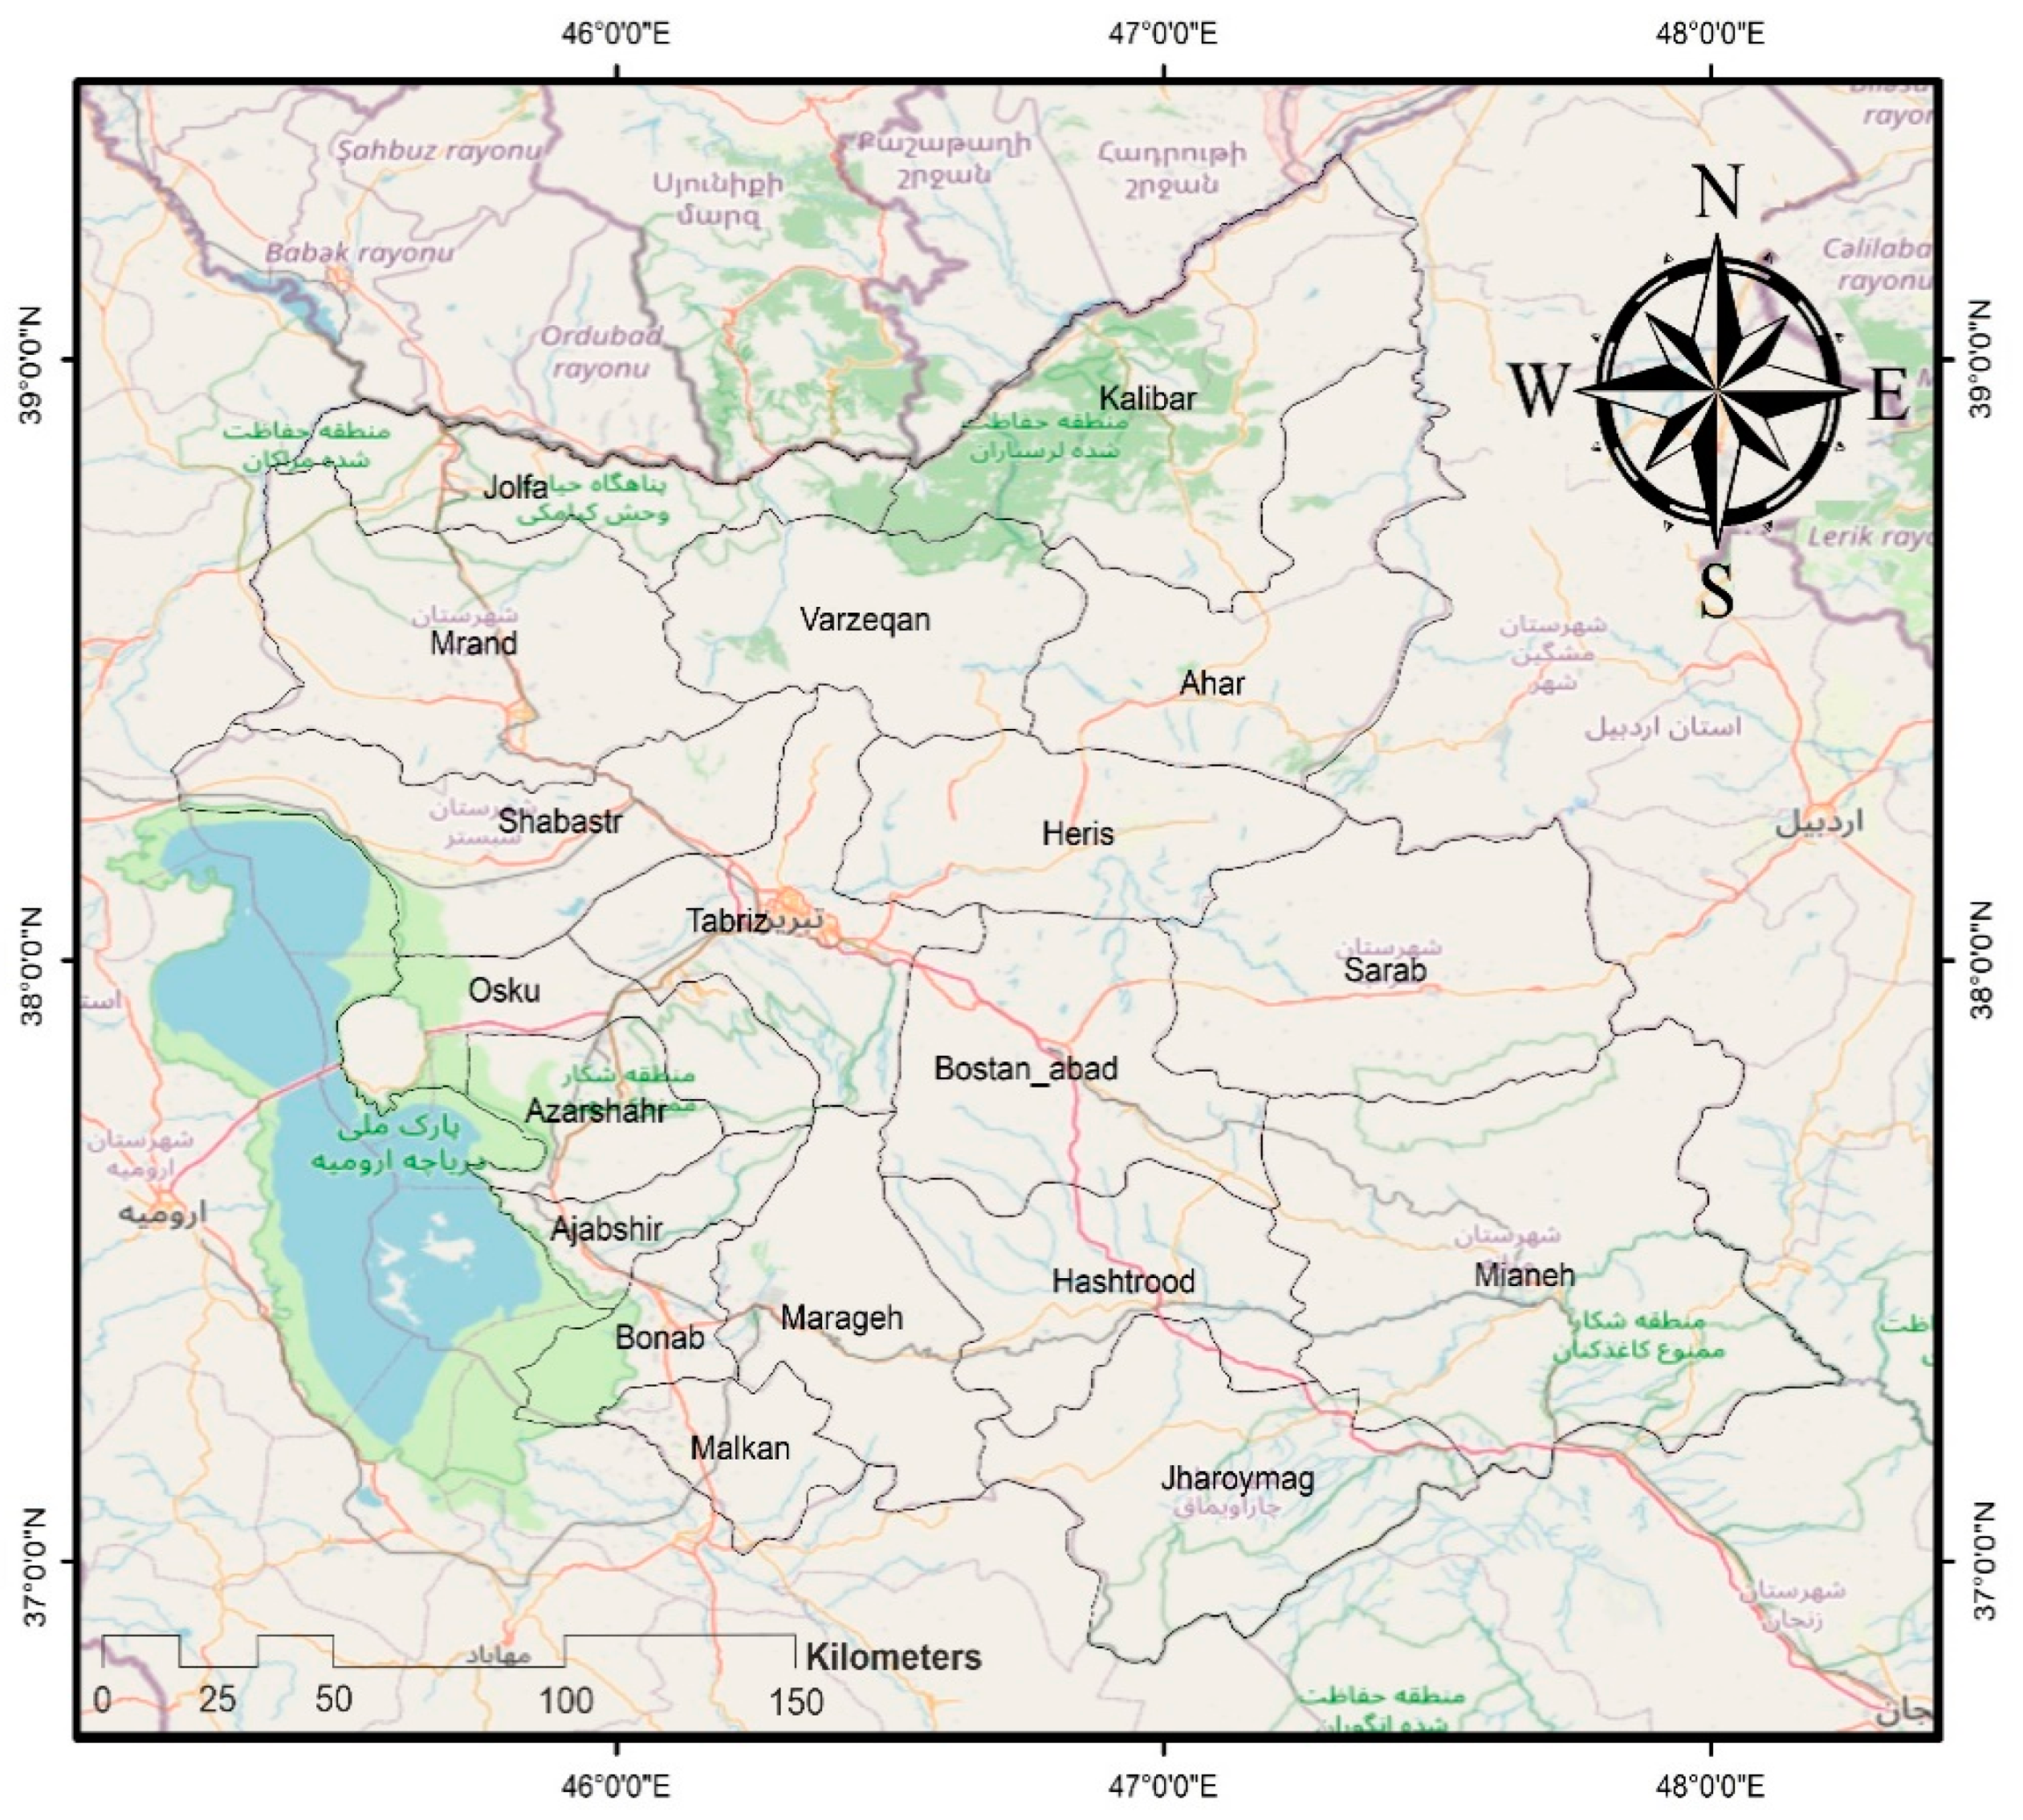 Sustainability | Free Full-Text | A GIS-Based Approach for  Spatially-Explicit Sustainable Development Assessments in East Azerbaijan  Province, Iran | HTML